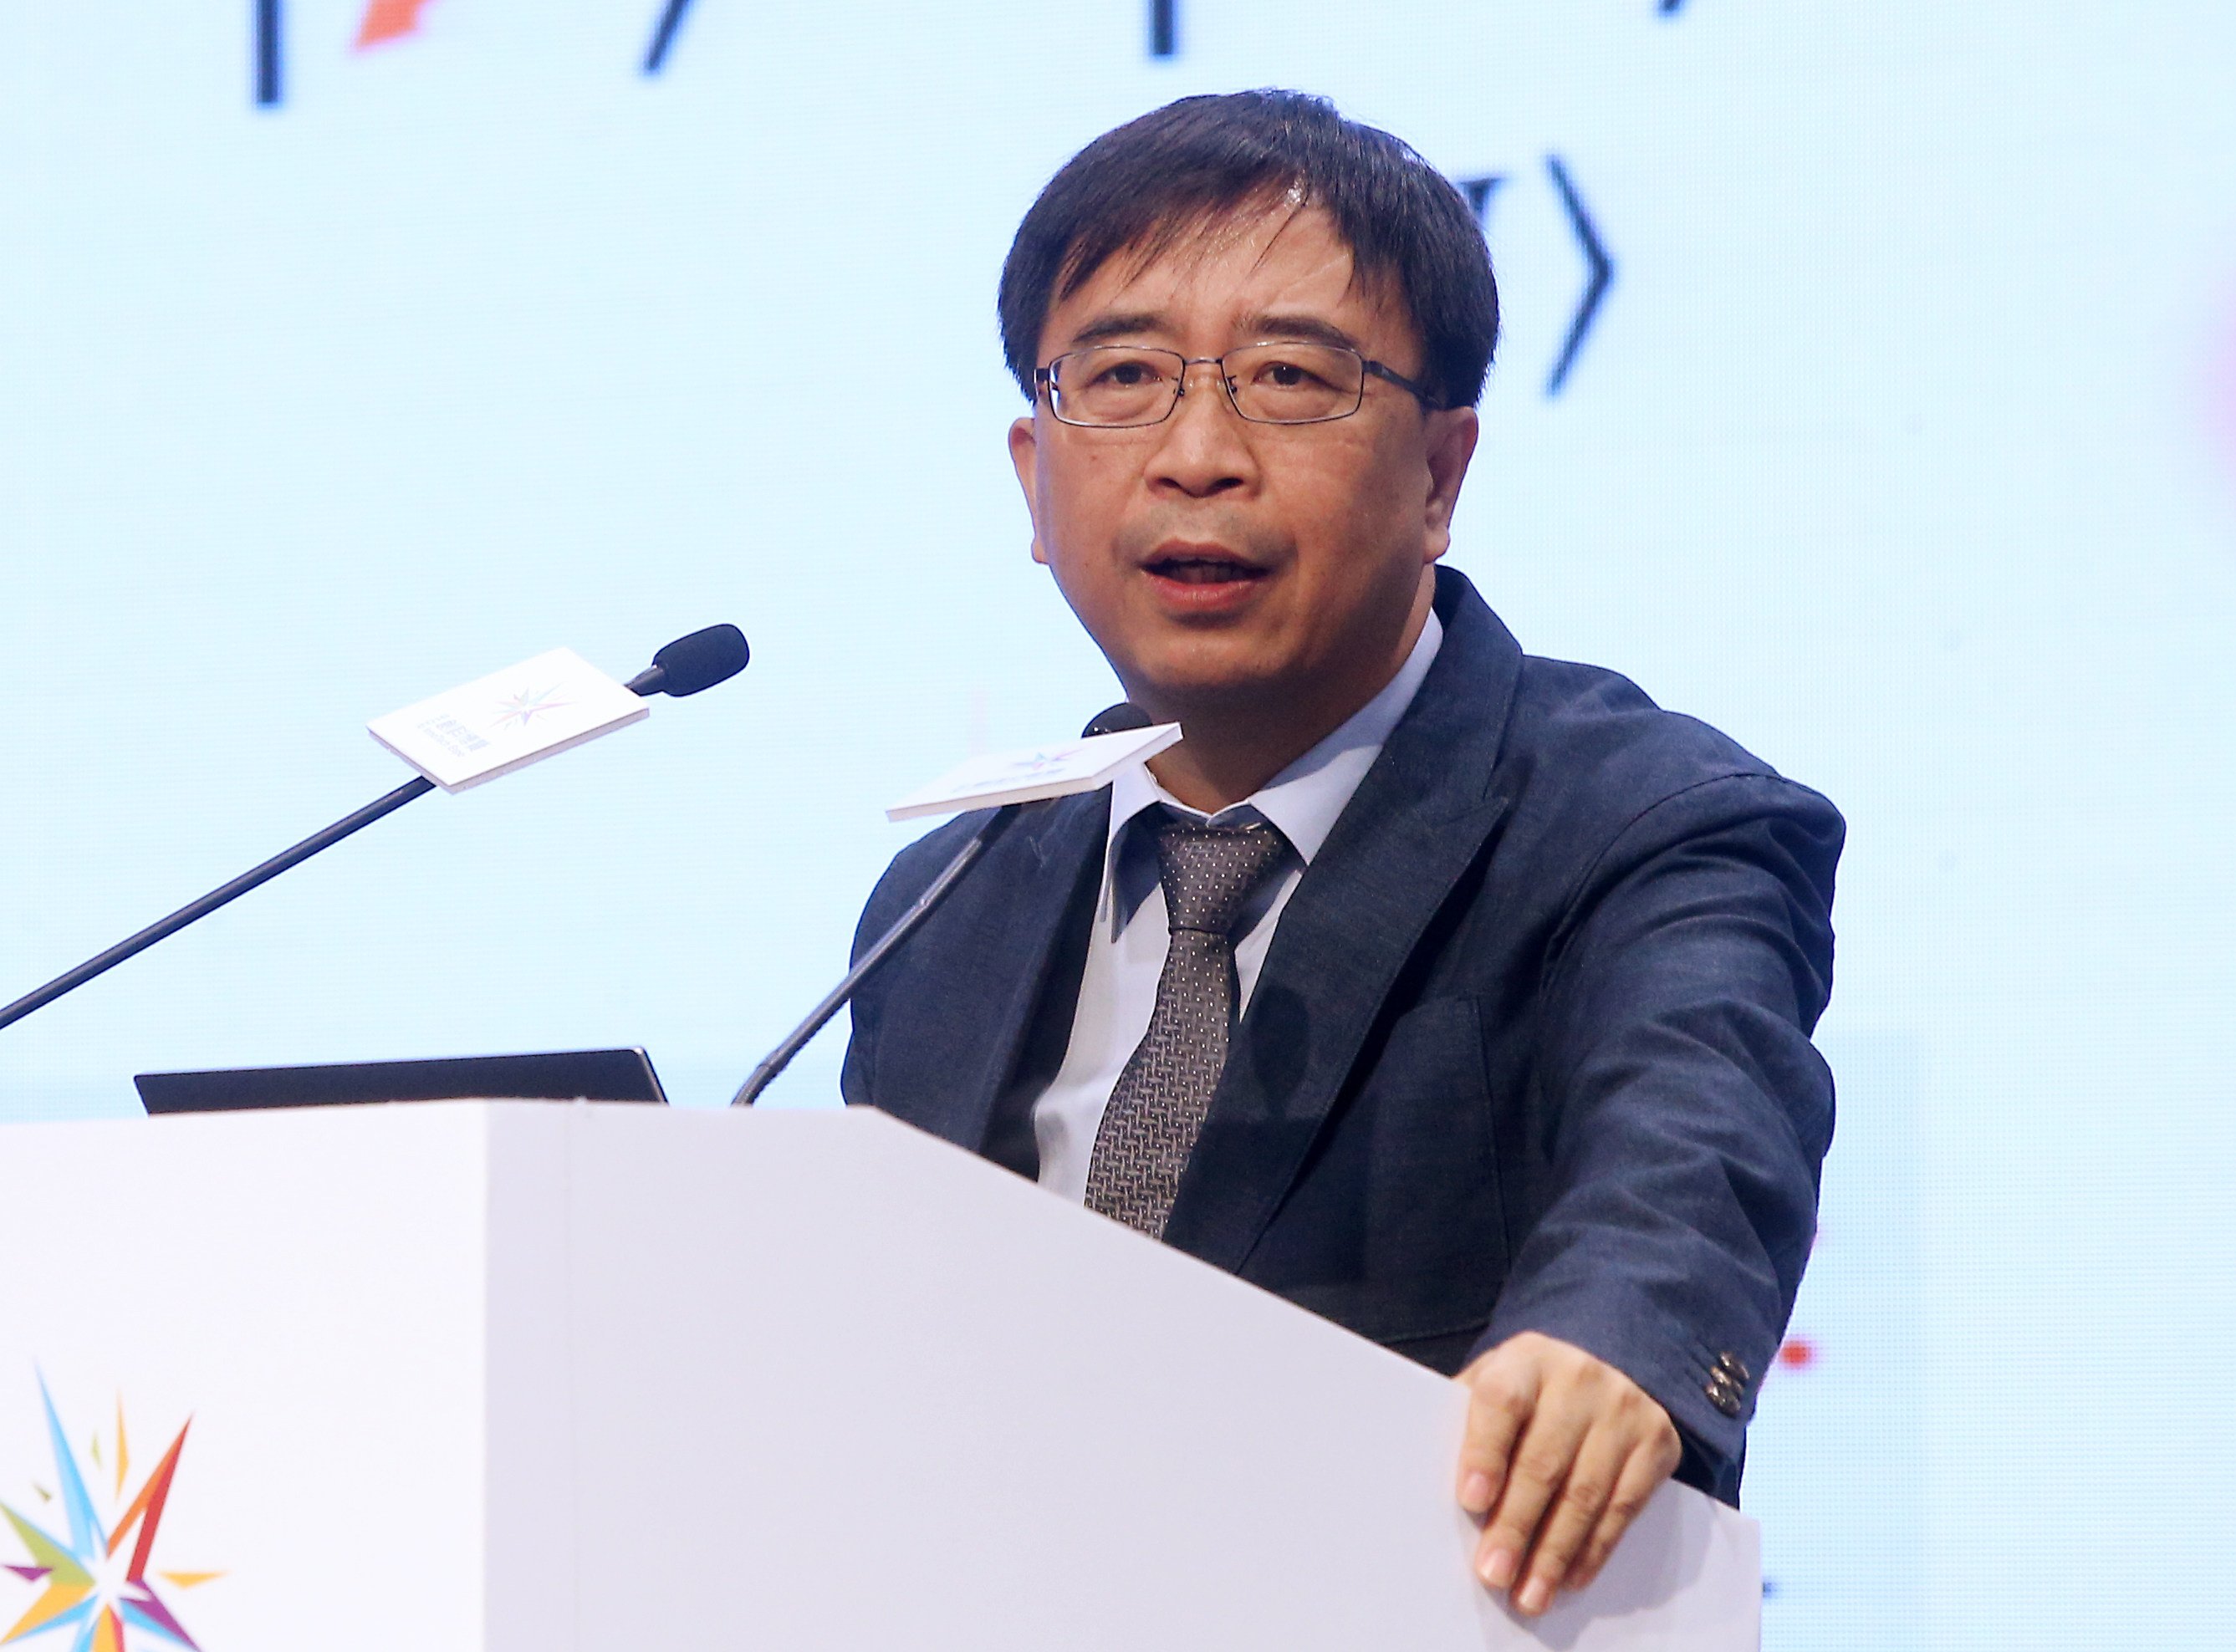 Pan Jianwei has been recognised by the Royal Society of London for his pioneering  work in areas including “quantum experiments in space” and achievements in quantum computing technology. Photo: Dickson Lee